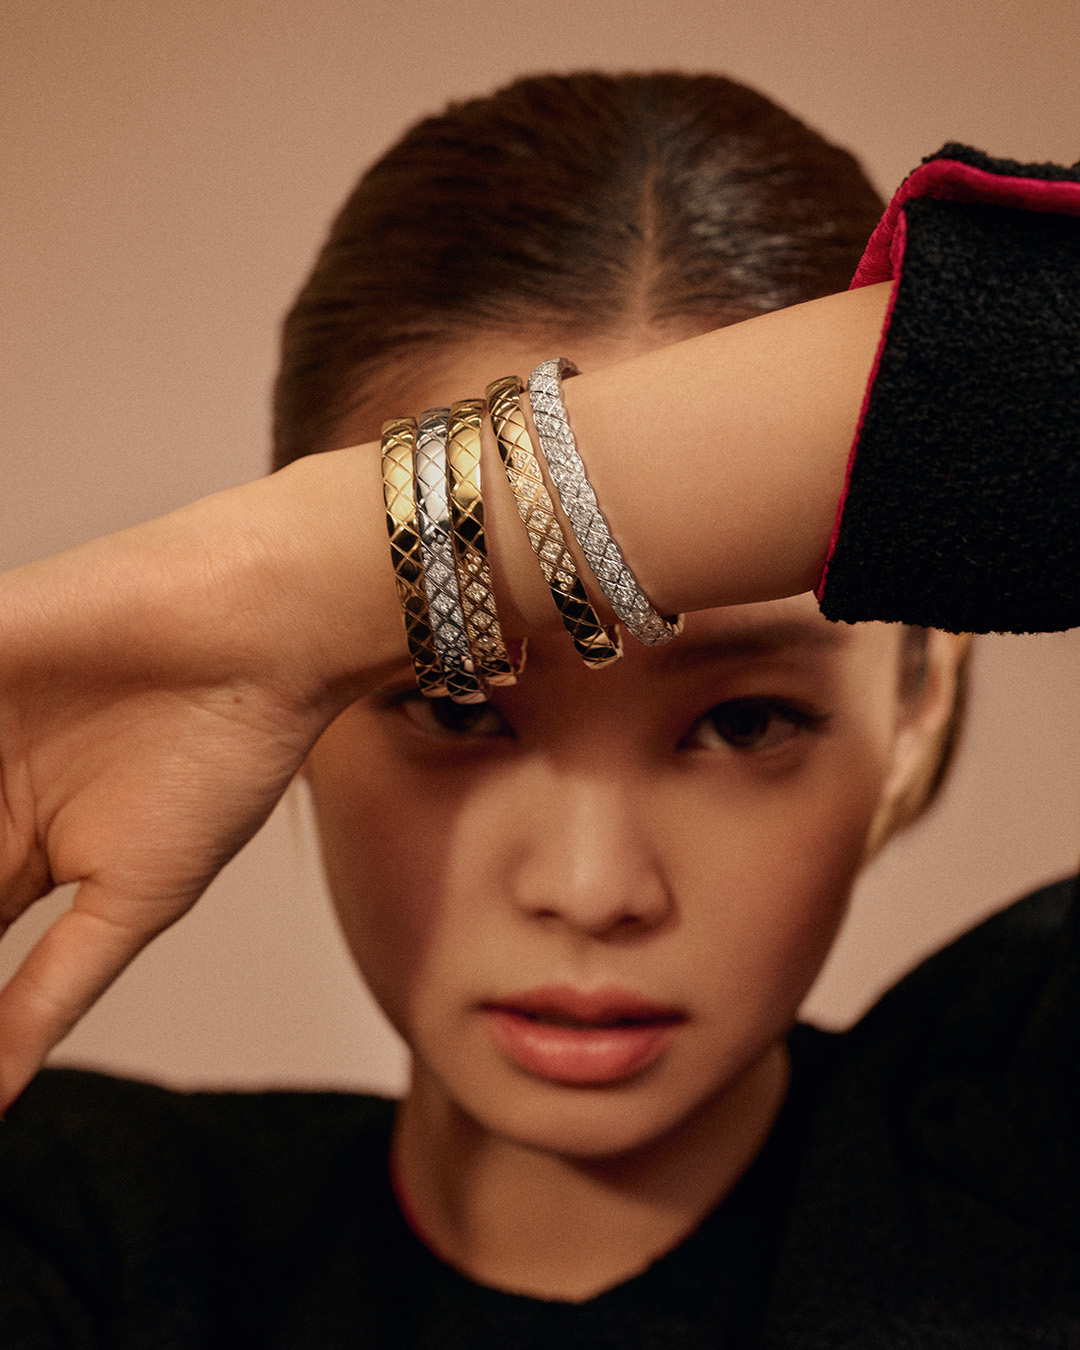 CHANEL on X: The art of accumulation. In BEIGE GOLD, yellow gold or white  gold, with or without diamonds, bracelets from the COCO CRUSH collection  can be stacked together or worn on